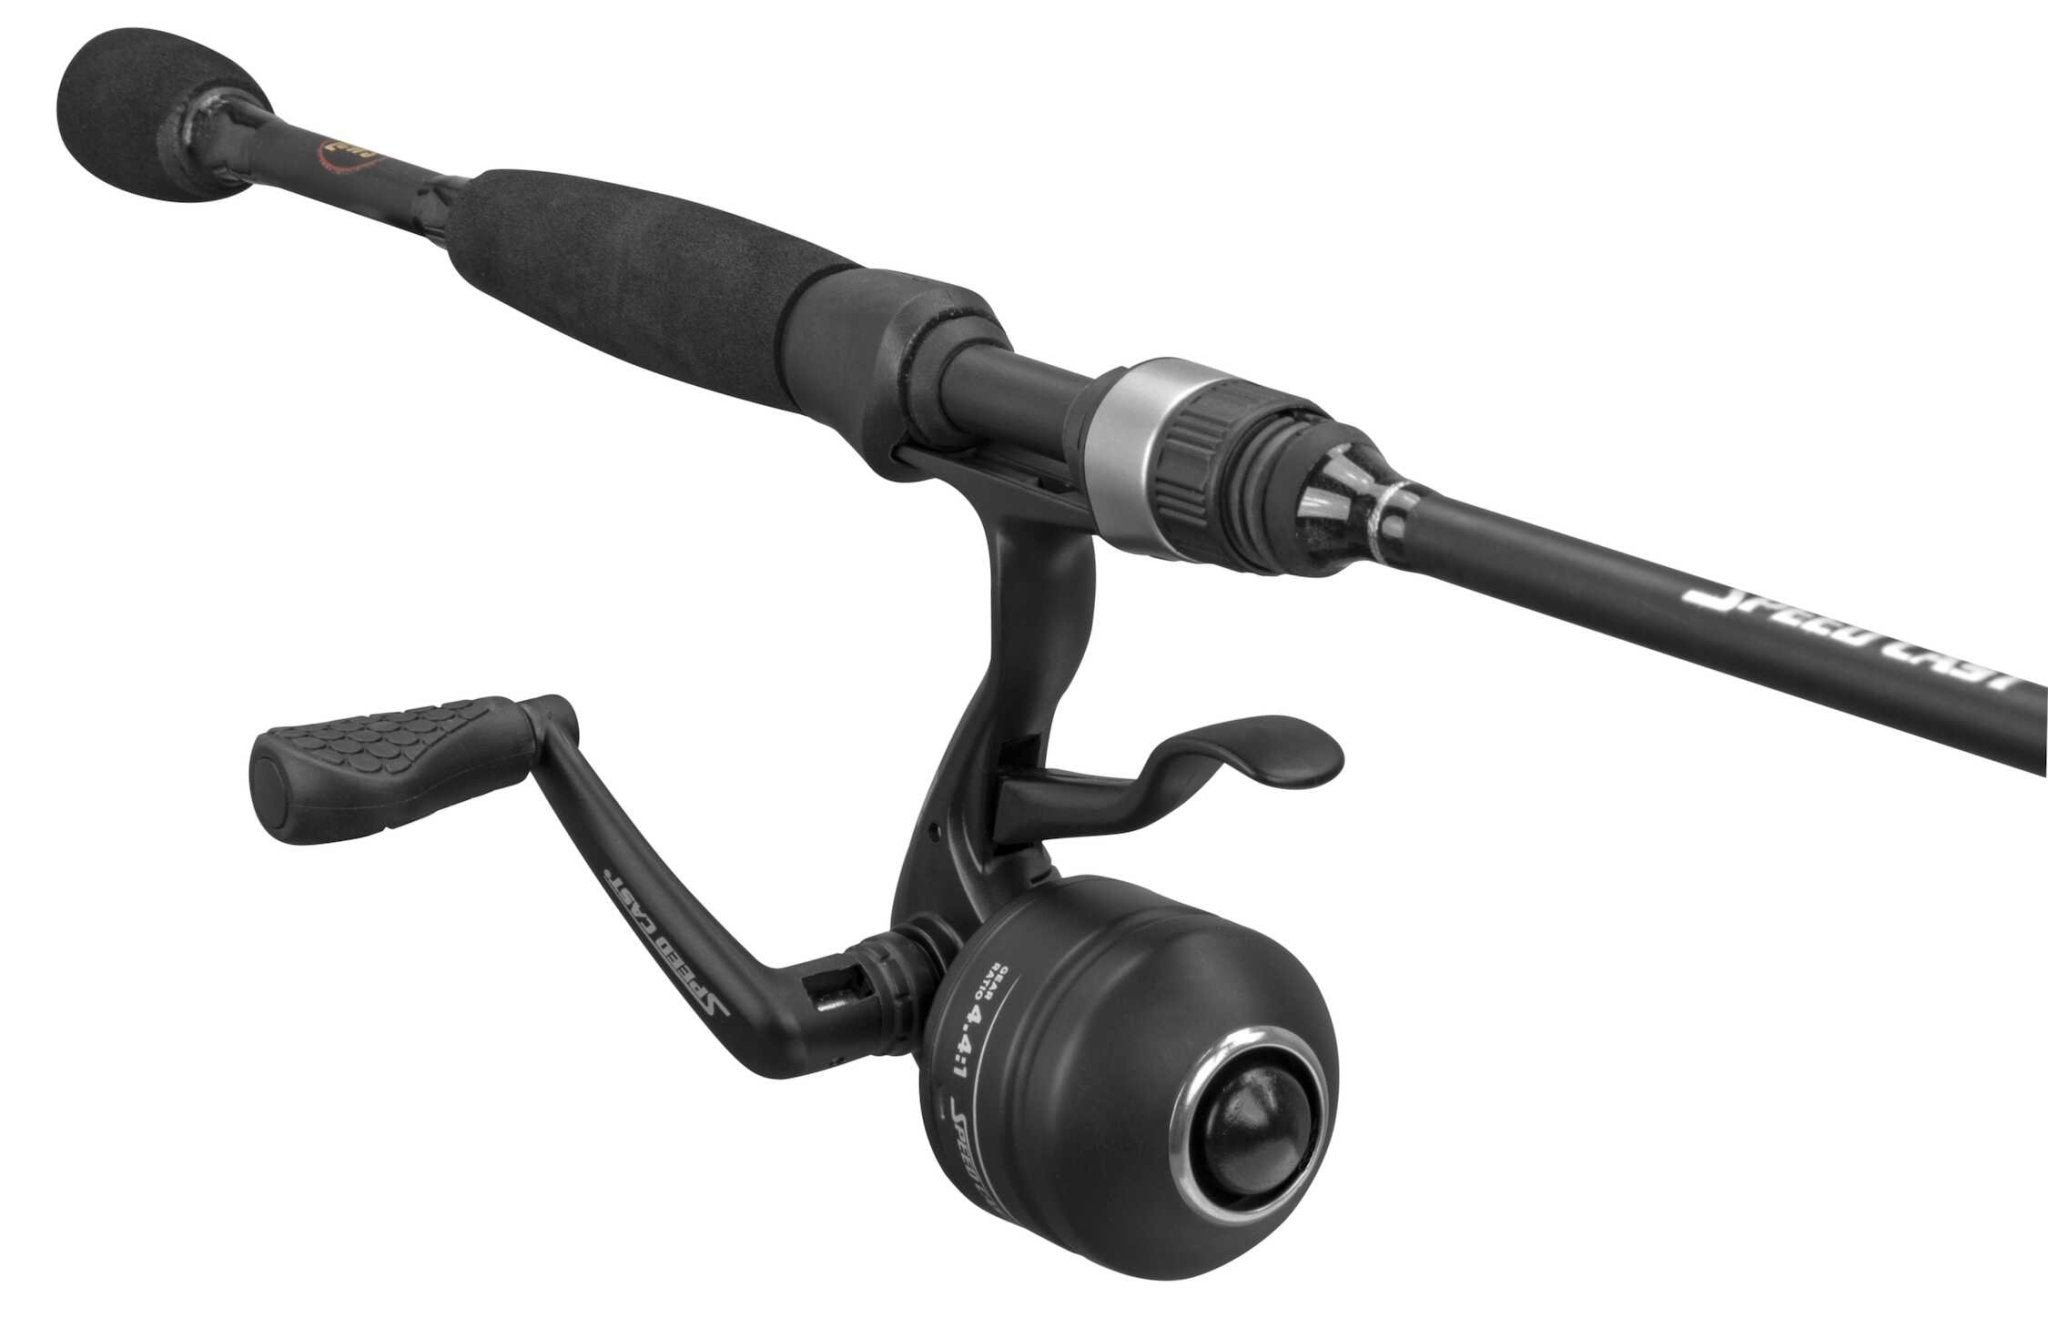 Lews Fishing LLS5050L1 Laserlite Speed Spin Combo for sale online